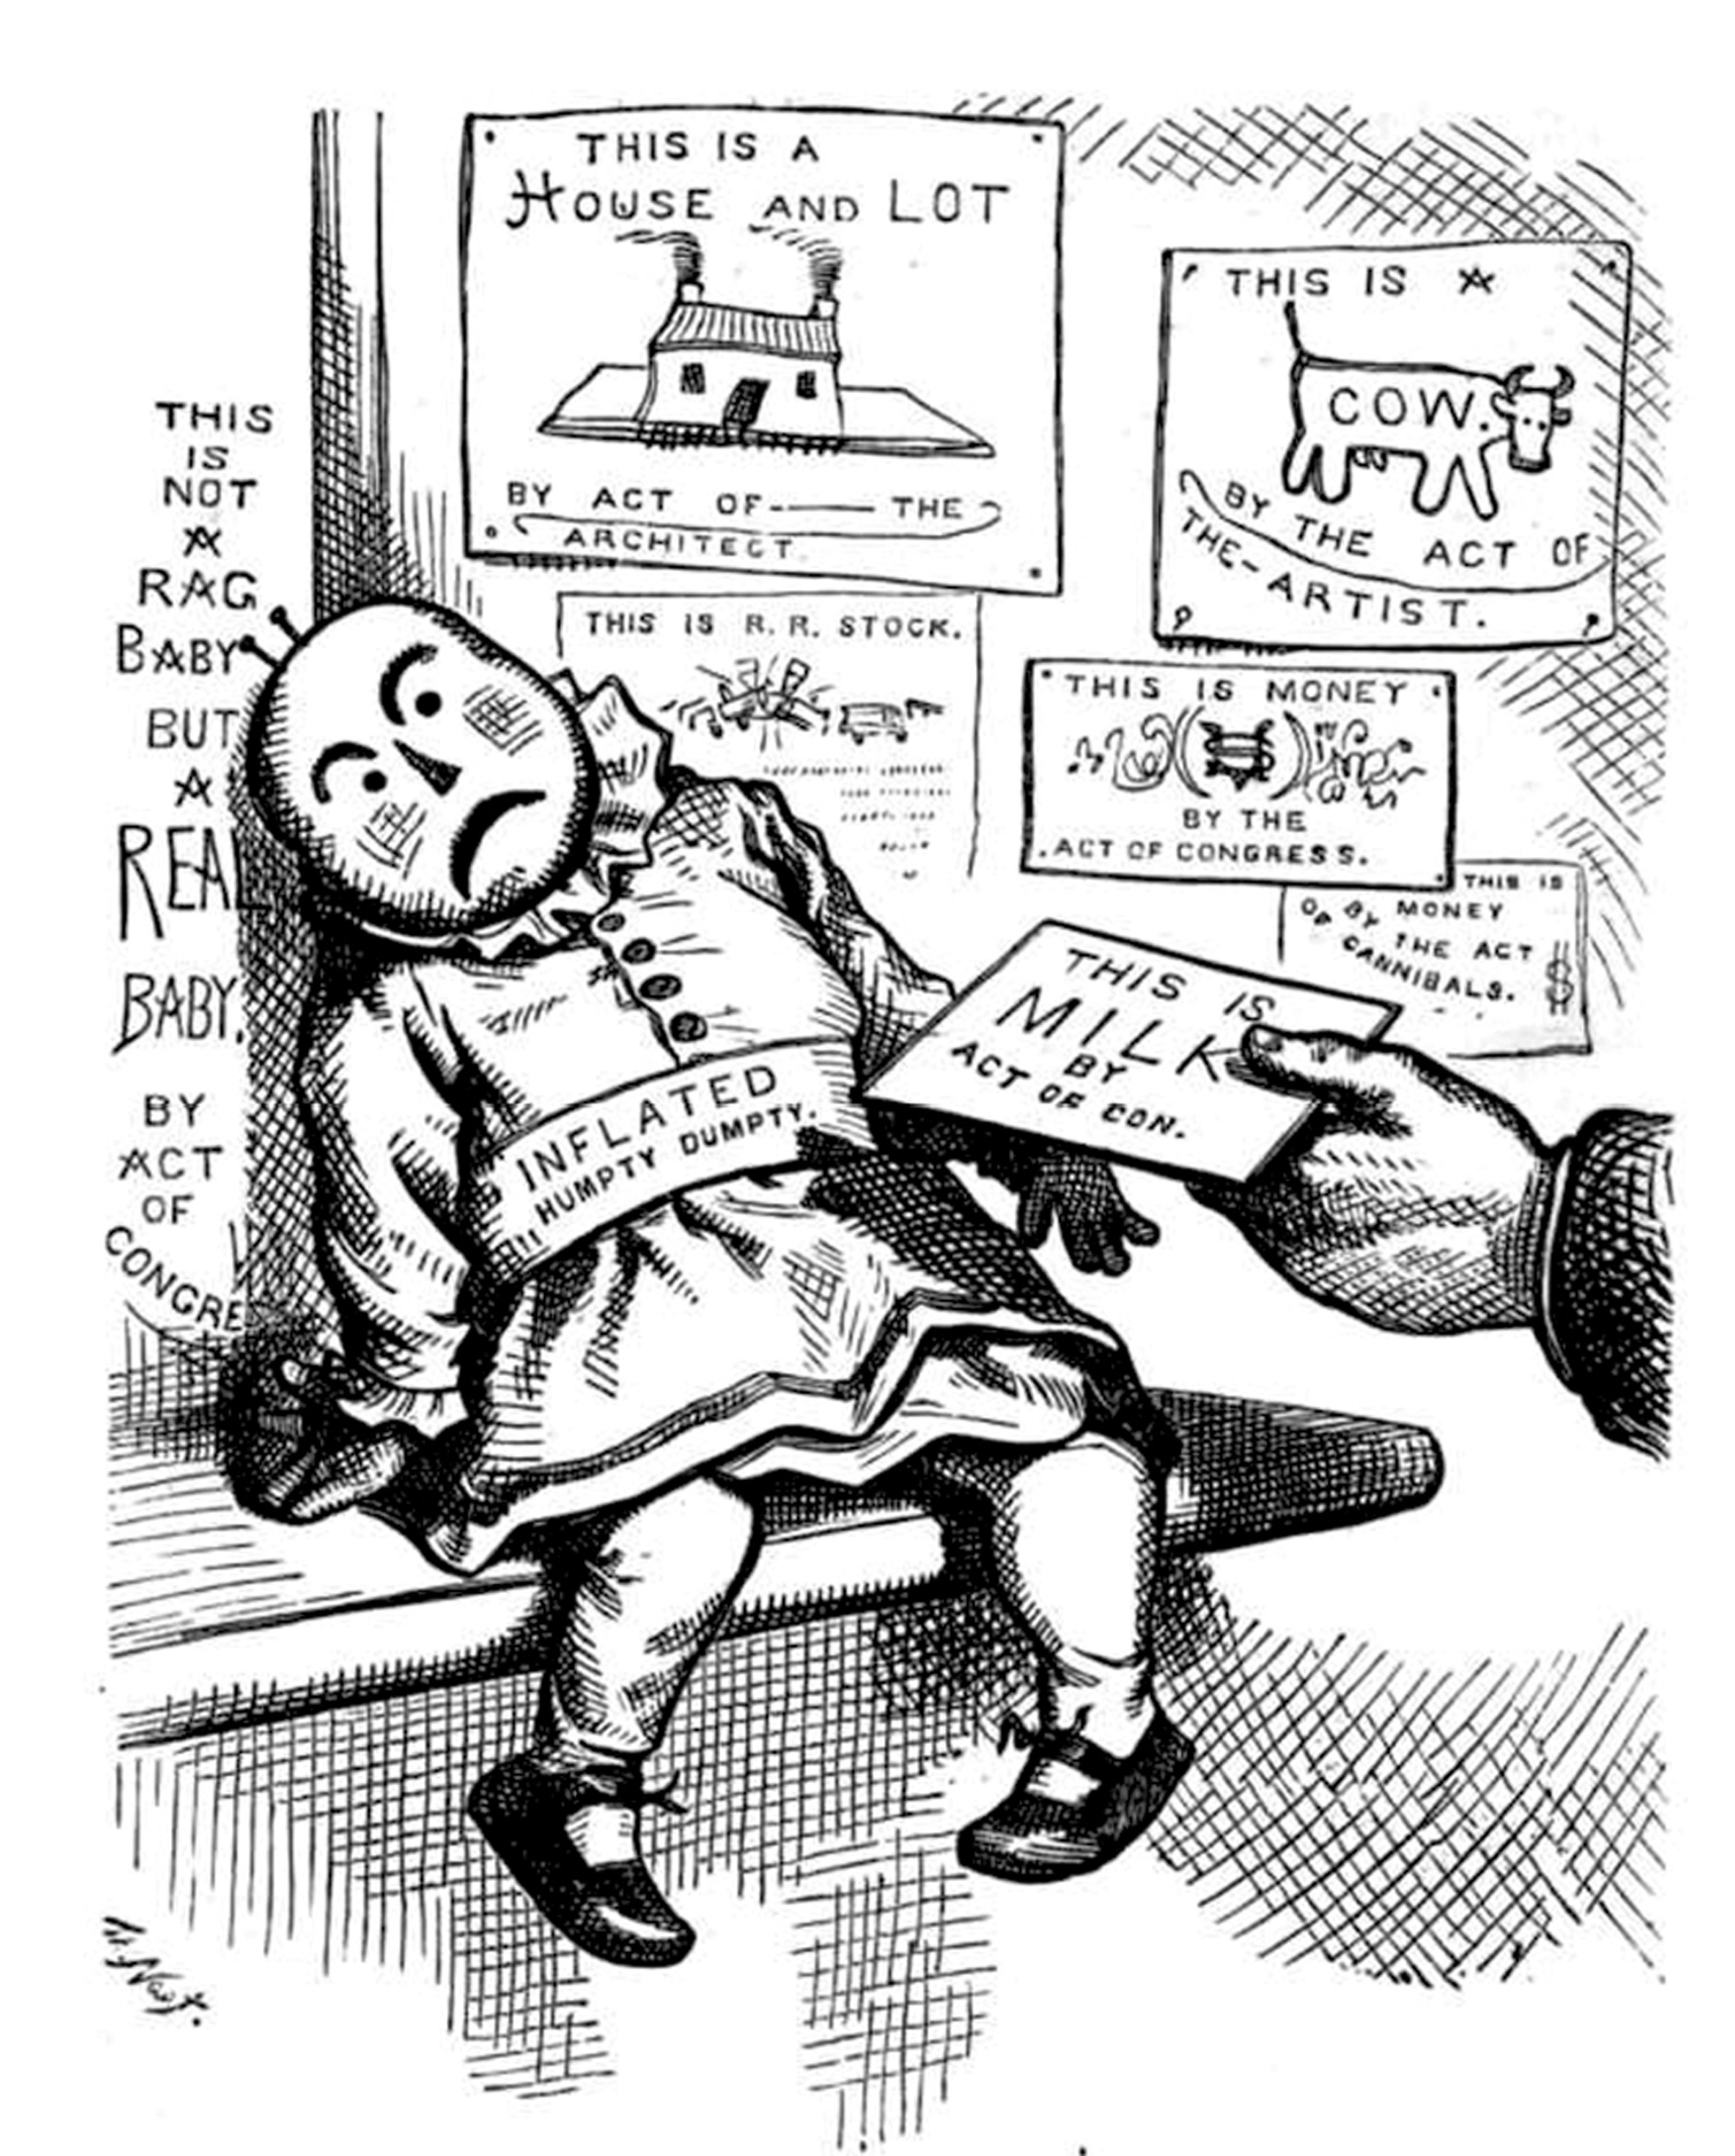 “Milk Tickets for Babies, In Place of Milk.” Illustration by Thomas Nast for David Wells’s Robinson Crusoe’s Money (1876), a critique of the paper money inflation caused by the Civil War.